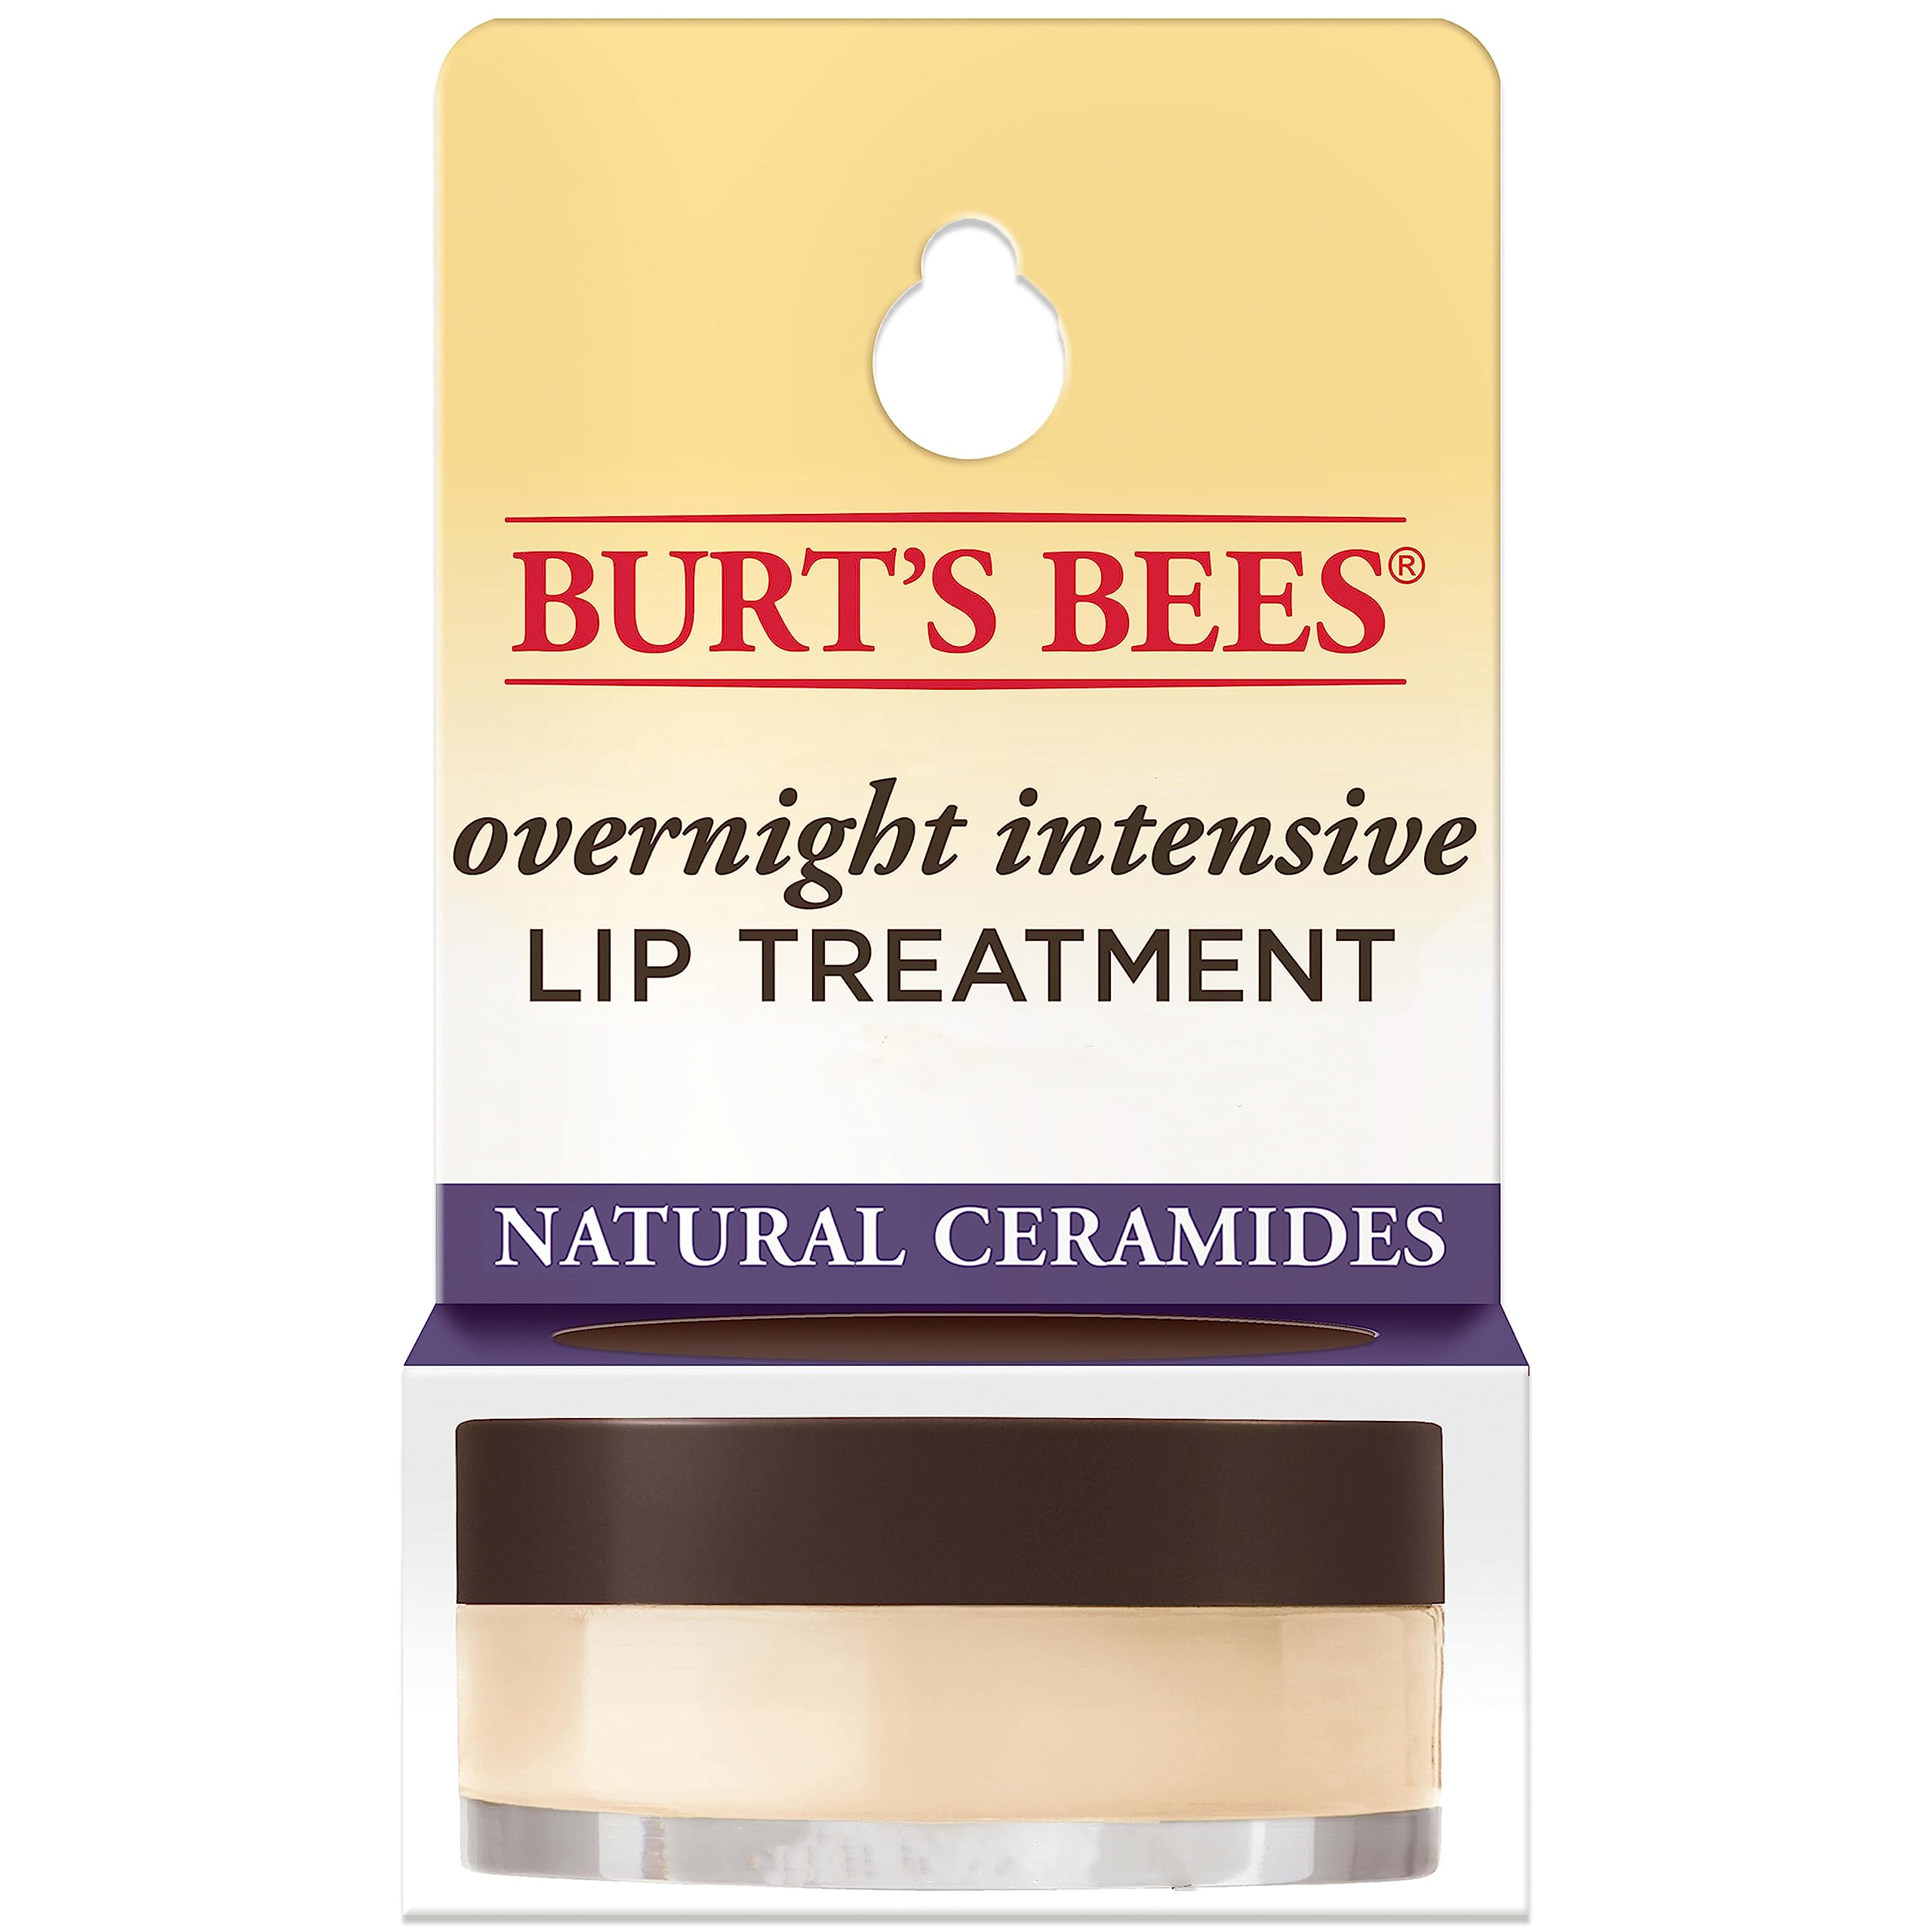 Burts Bees Overnight Intensive Lip Treatment with and Ceramides, Lip Hydrates Lips 8 Hours, Natural Origin, 0.25 oz